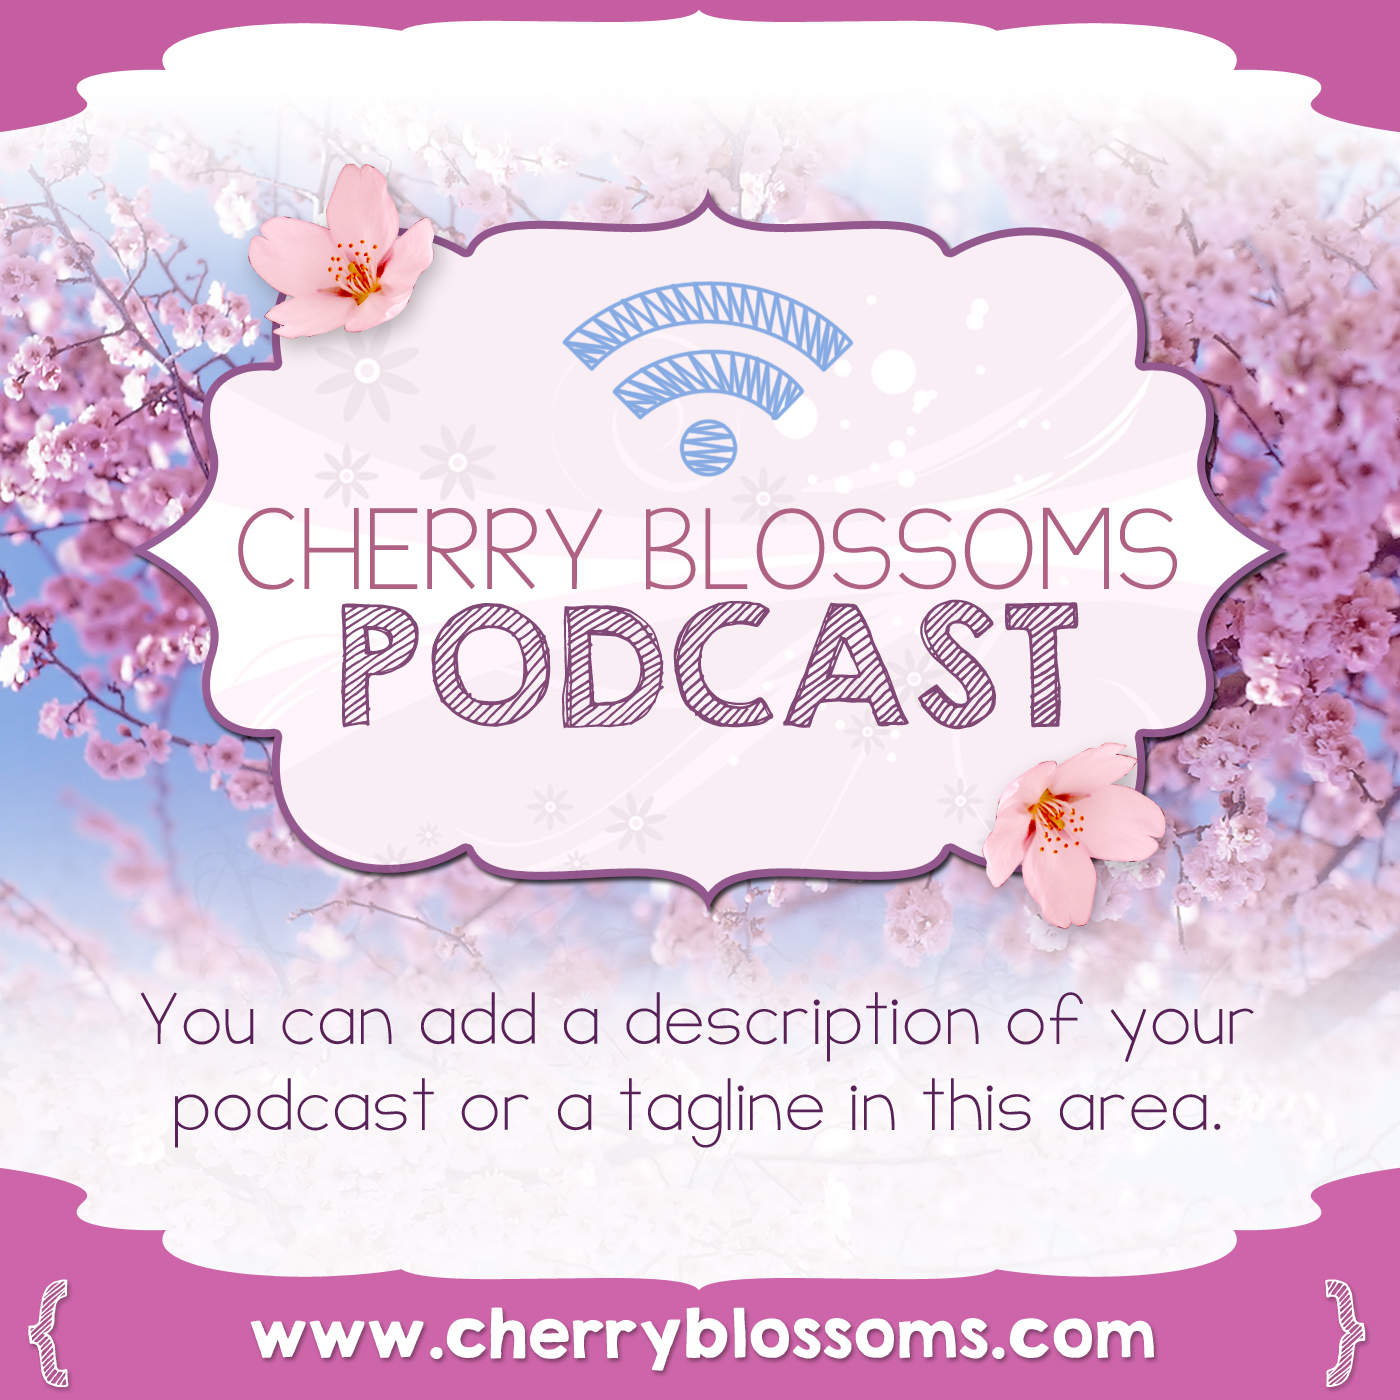 Cherry Blossoms Podcast